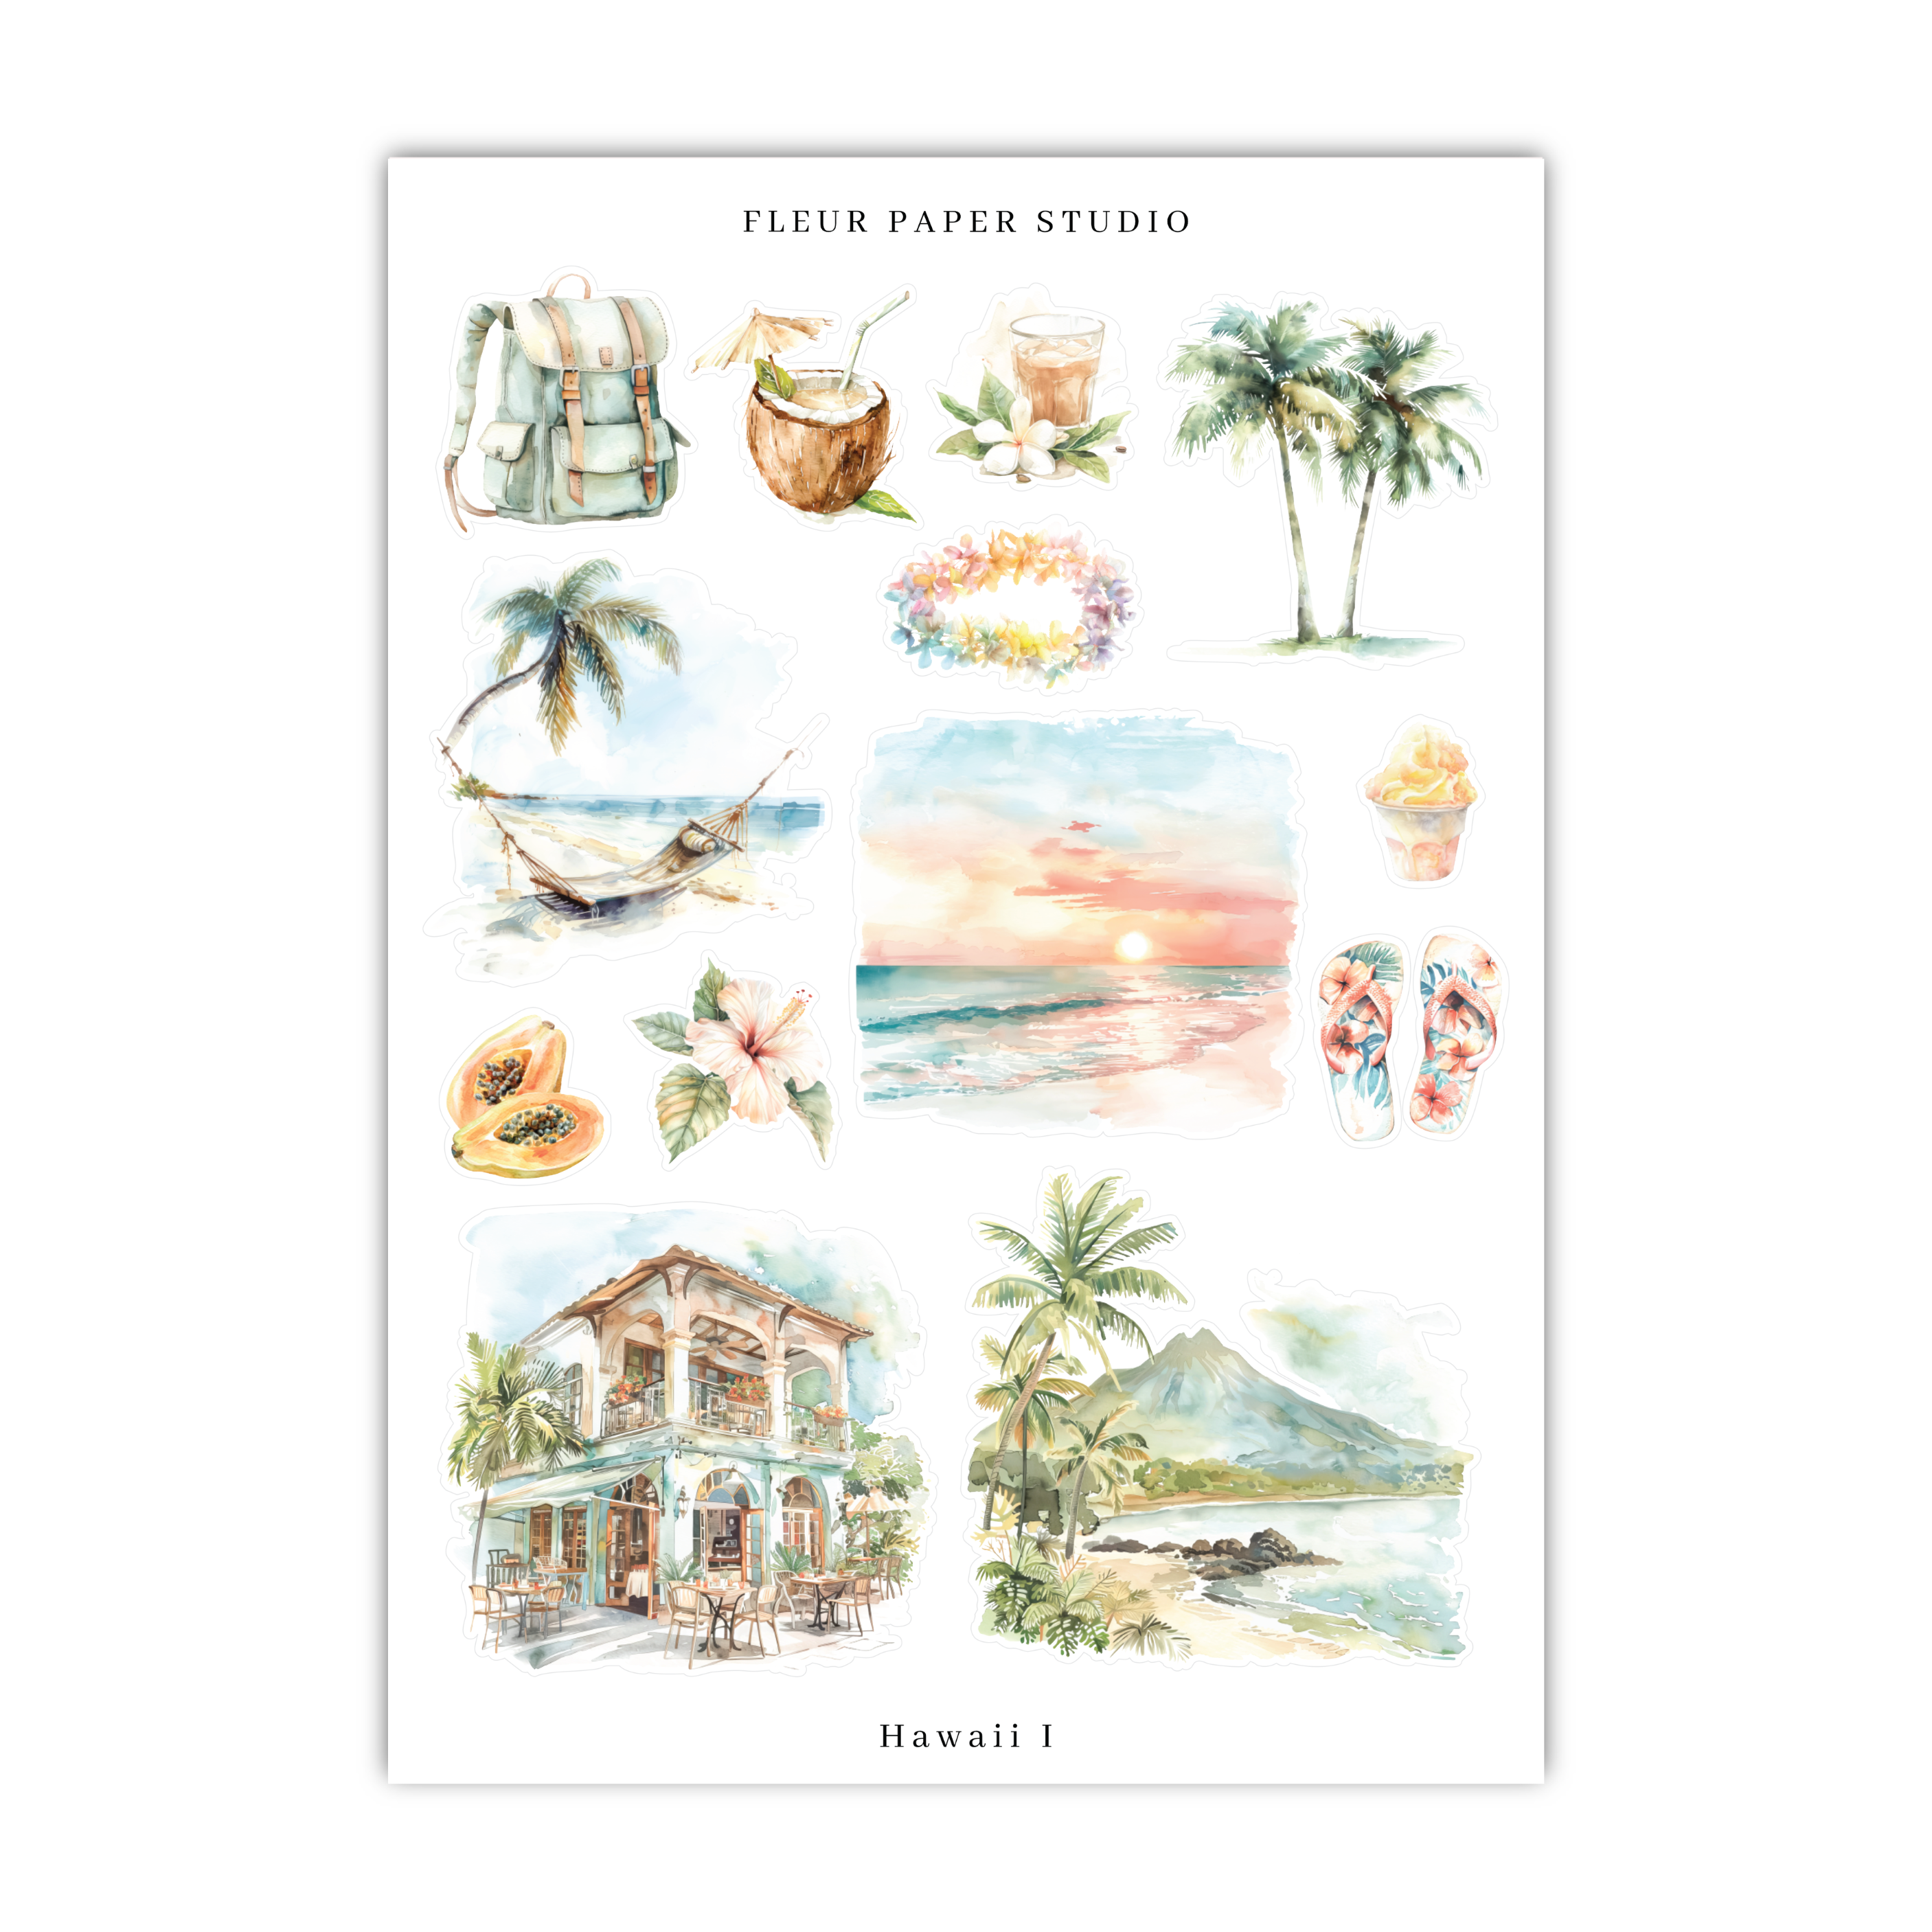 a poster of a beach scene with palm trees